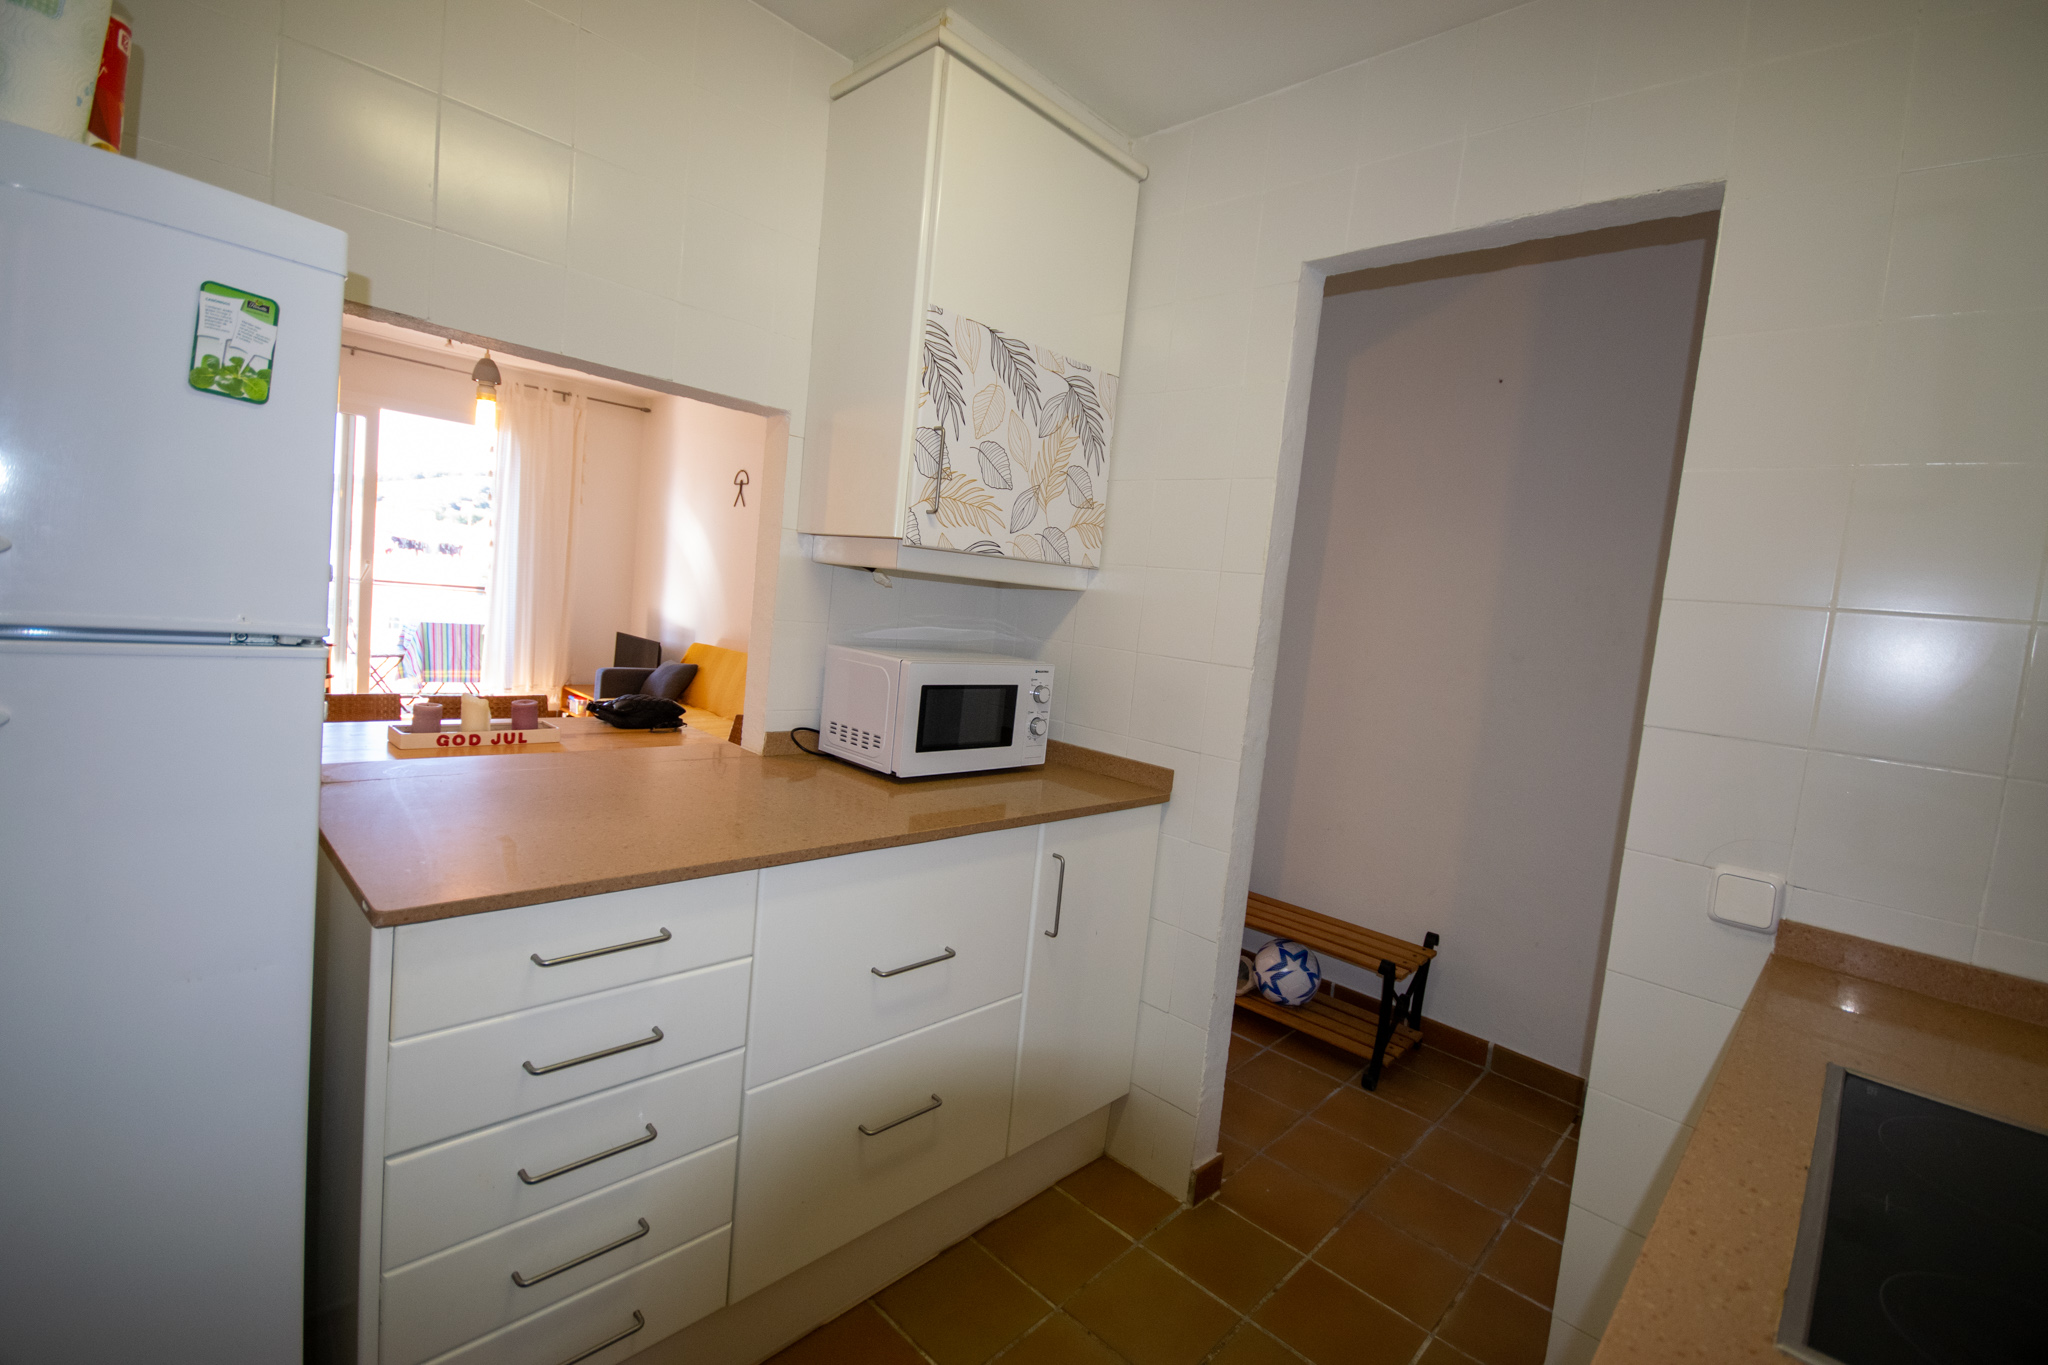 2-bedroom flat kitchen with terrace for sale in Es Mercadal